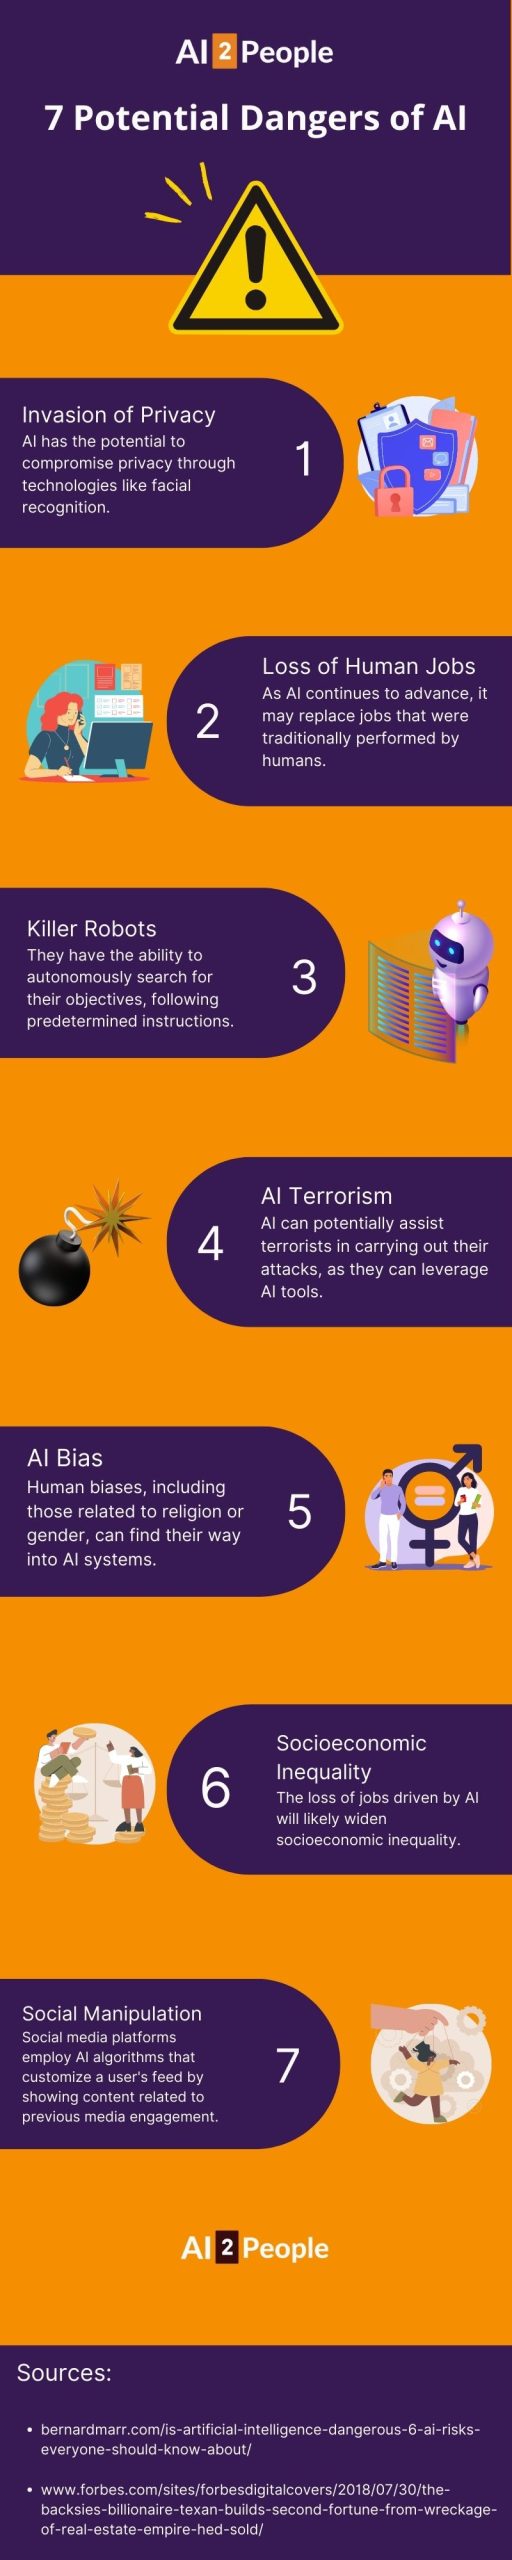 7 potential dangers of AI infograpchic